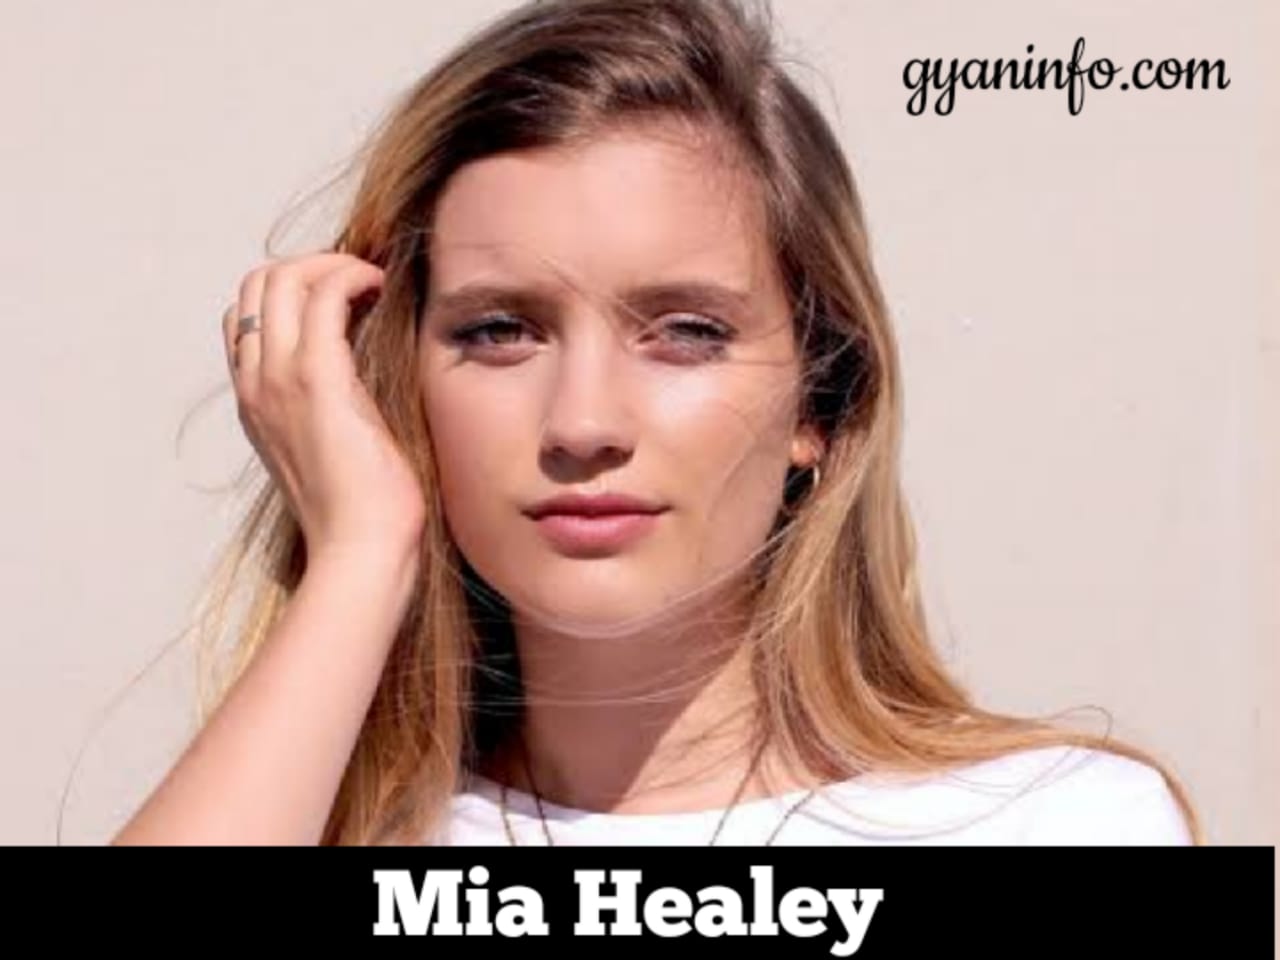 Mia Healey Biography, Height, Age, Weight, Body Measurements, Boyfriend, Family, Husband, Net Worth, Wiki & More